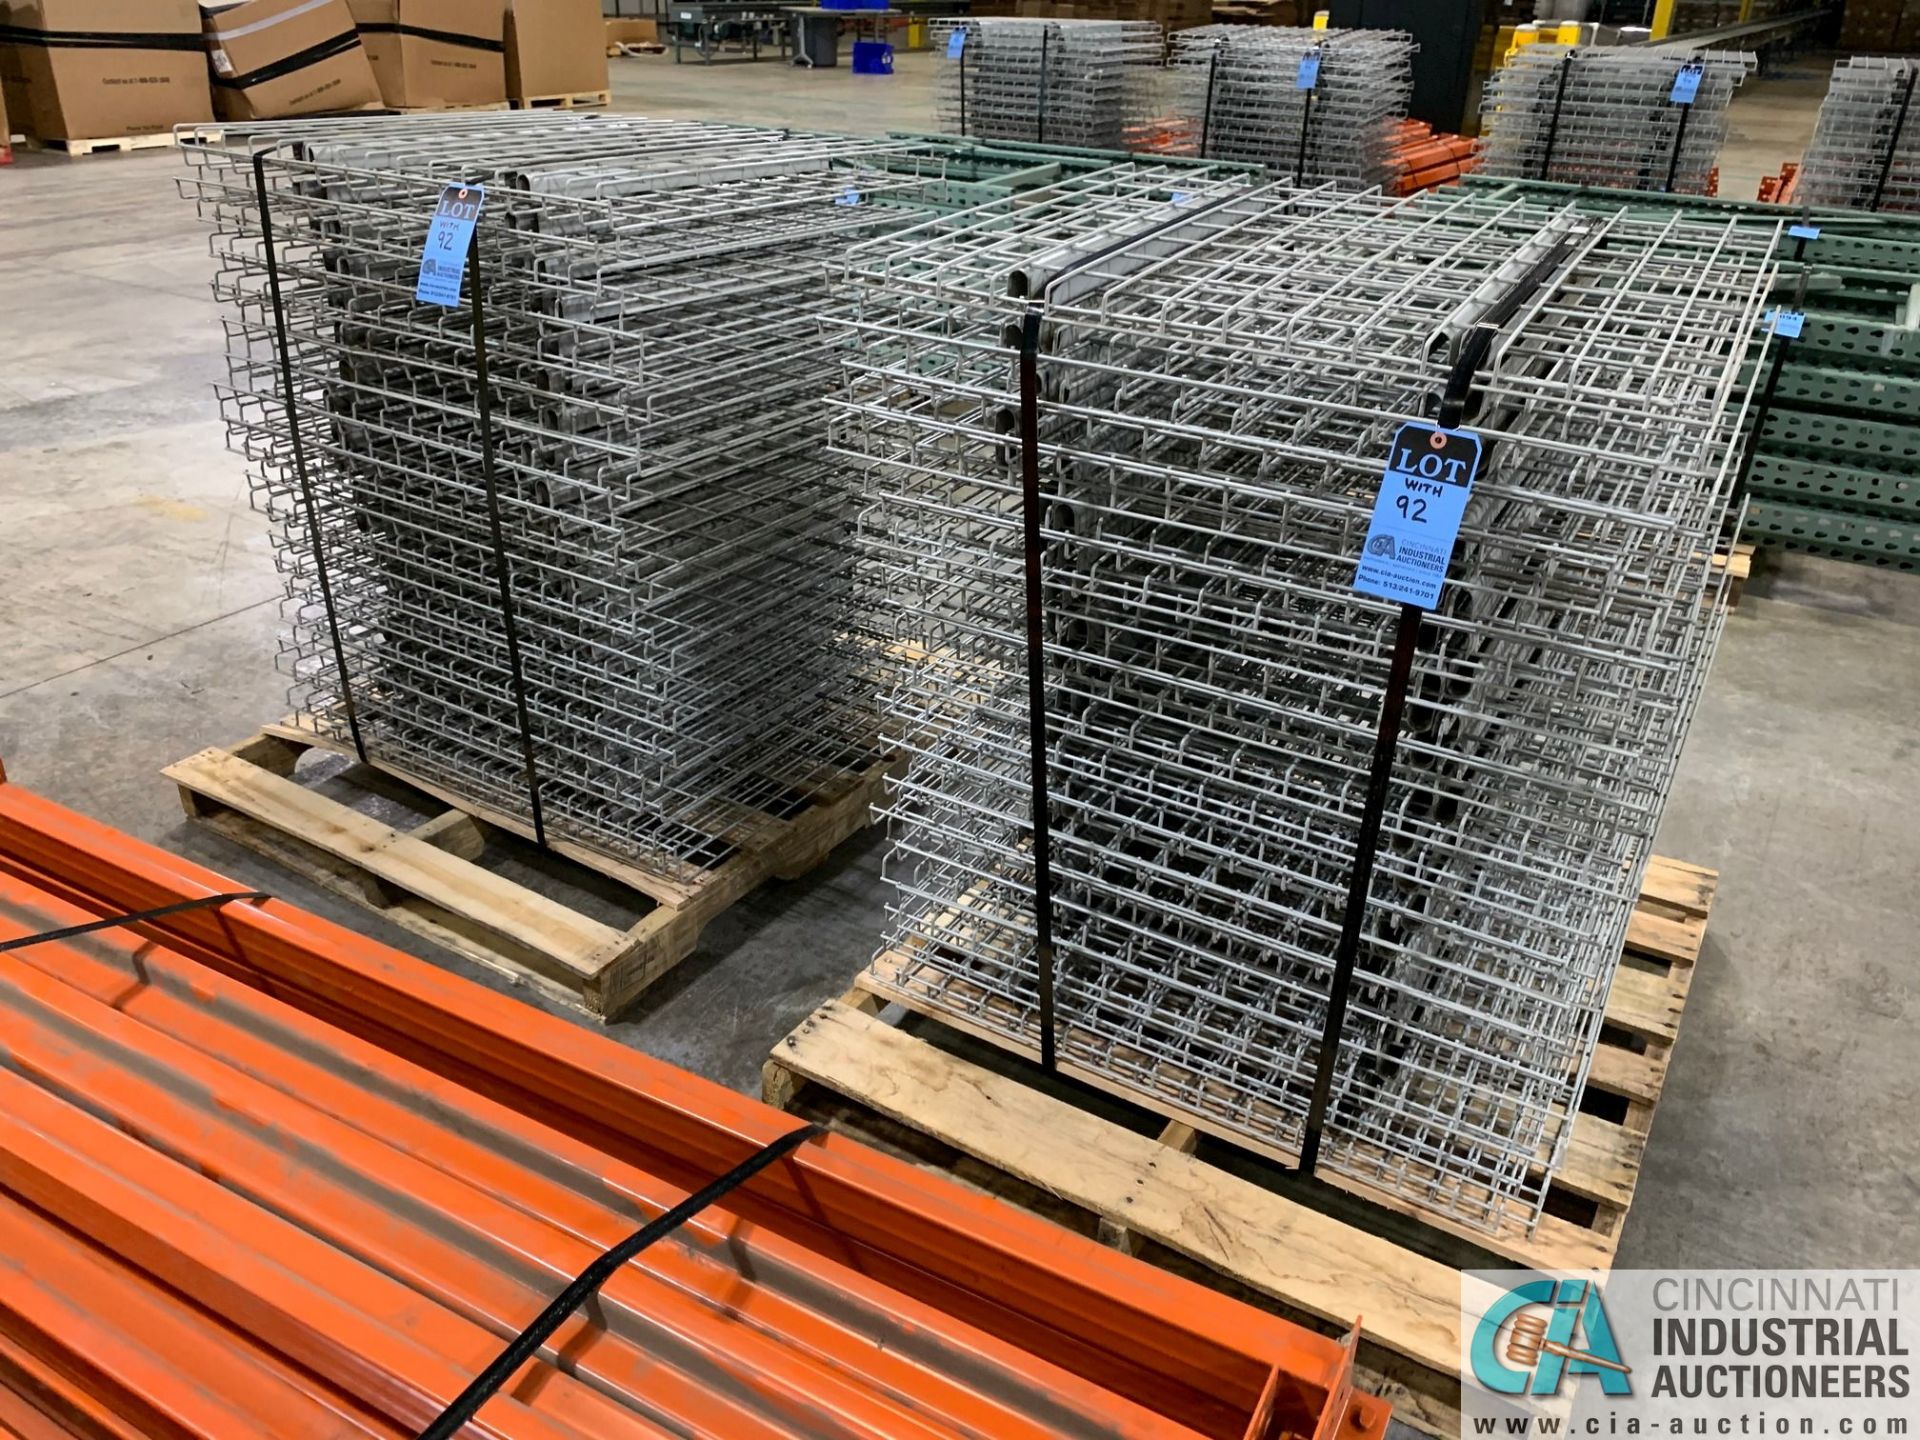 FREE-STANDING SECTIONS 30" X 72" X 72" HIGH ADJUSTABLE BEAM WIRE DECK PALLET RACK CONSISTING OF - Image 6 of 6